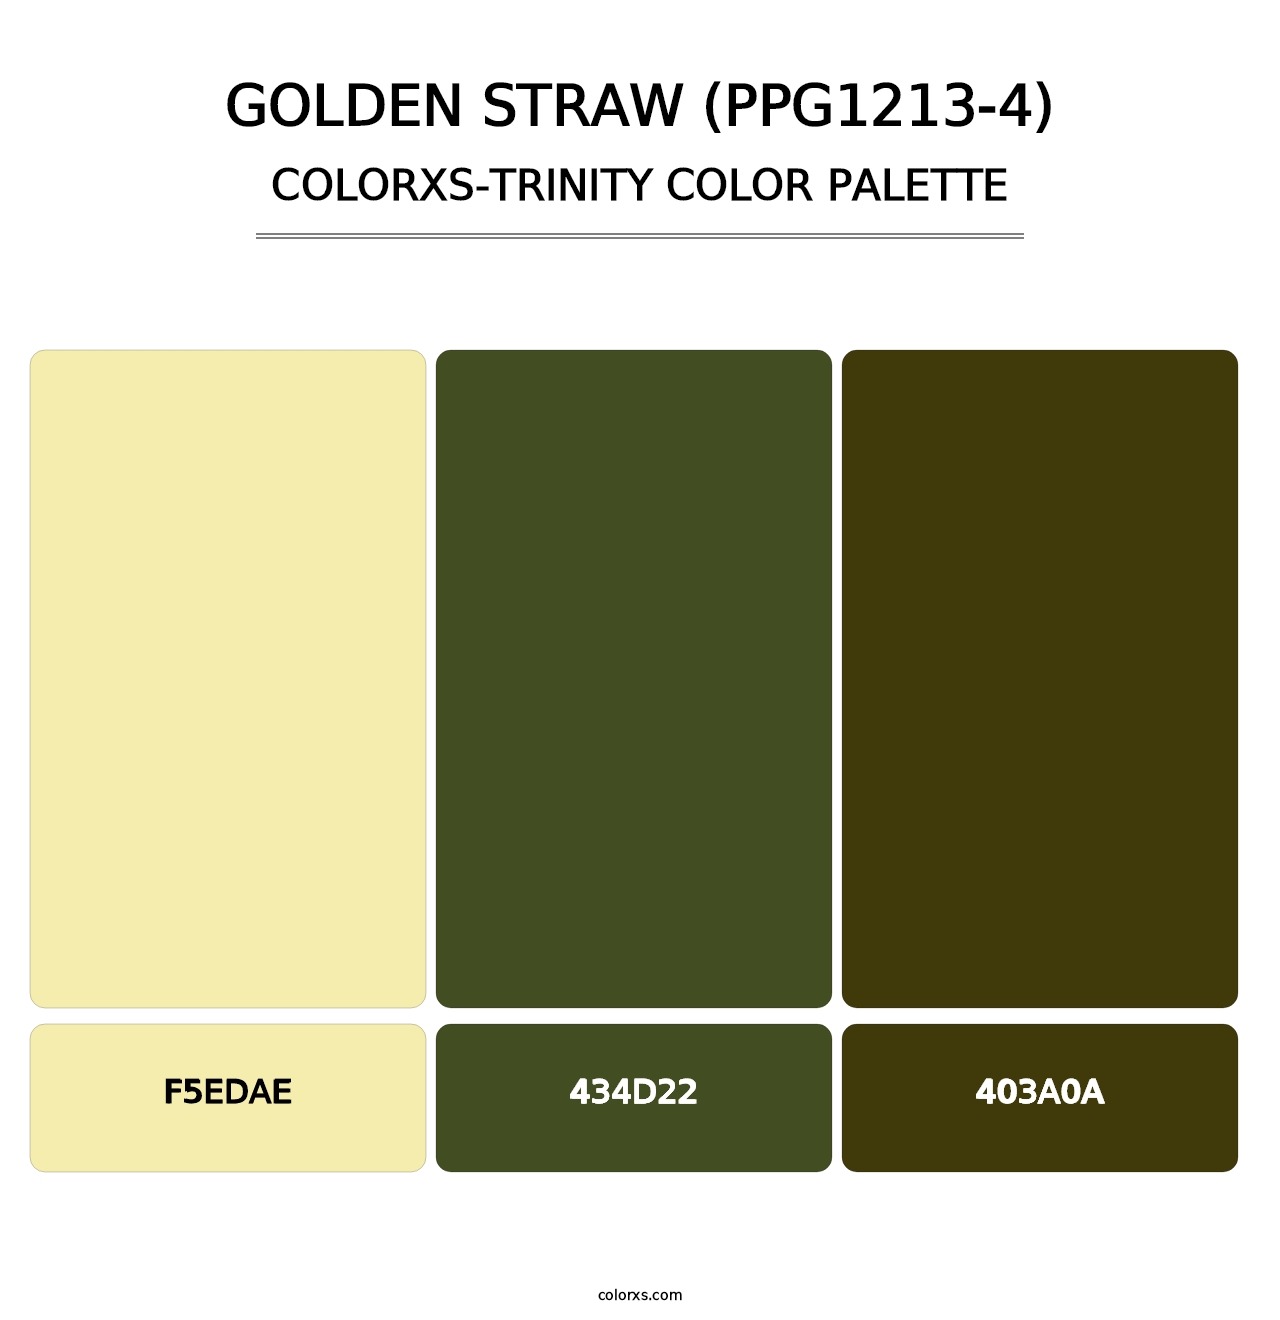 Golden Straw (PPG1213-4) - Colorxs Trinity Palette